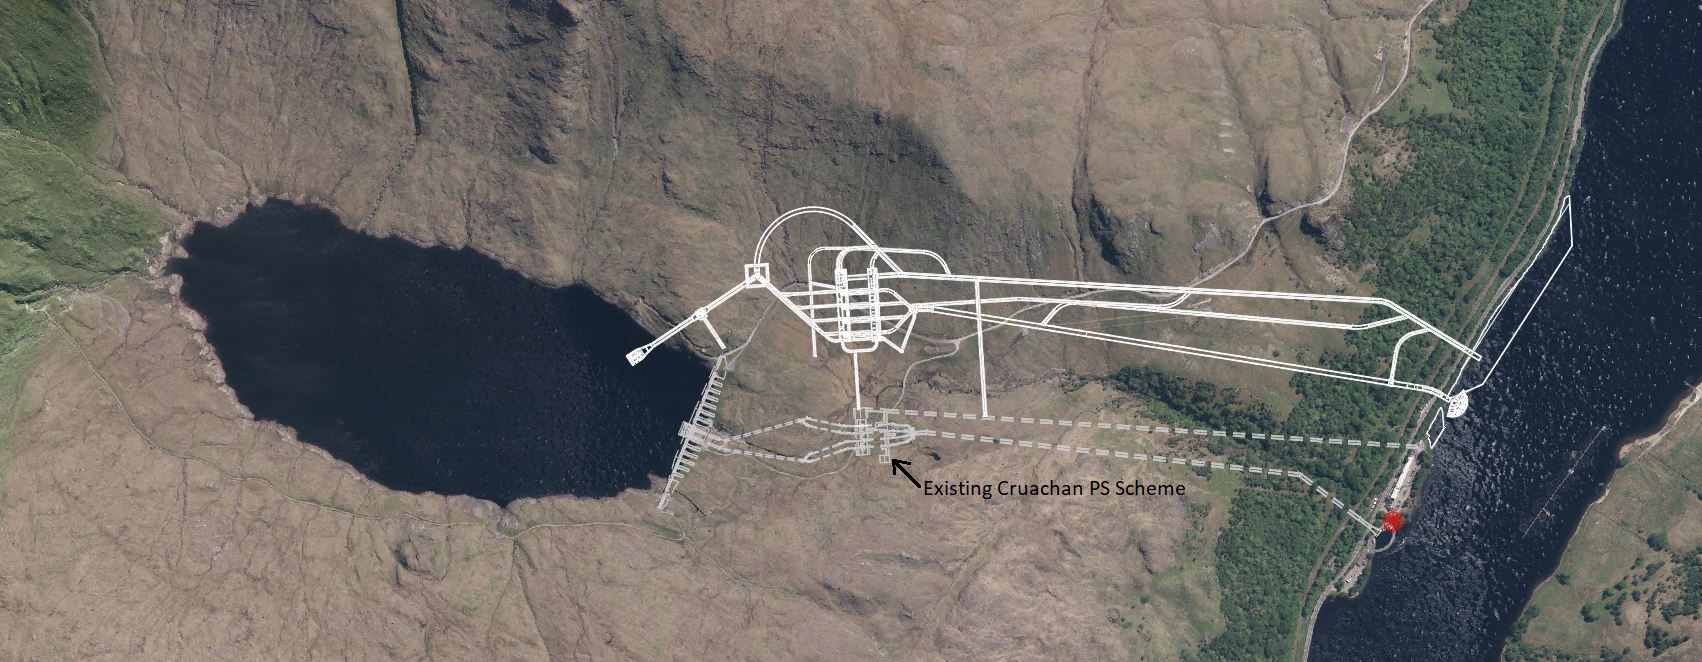 Drax unveils plan to expand ‘Hollow Mountain’ Cruachan power station